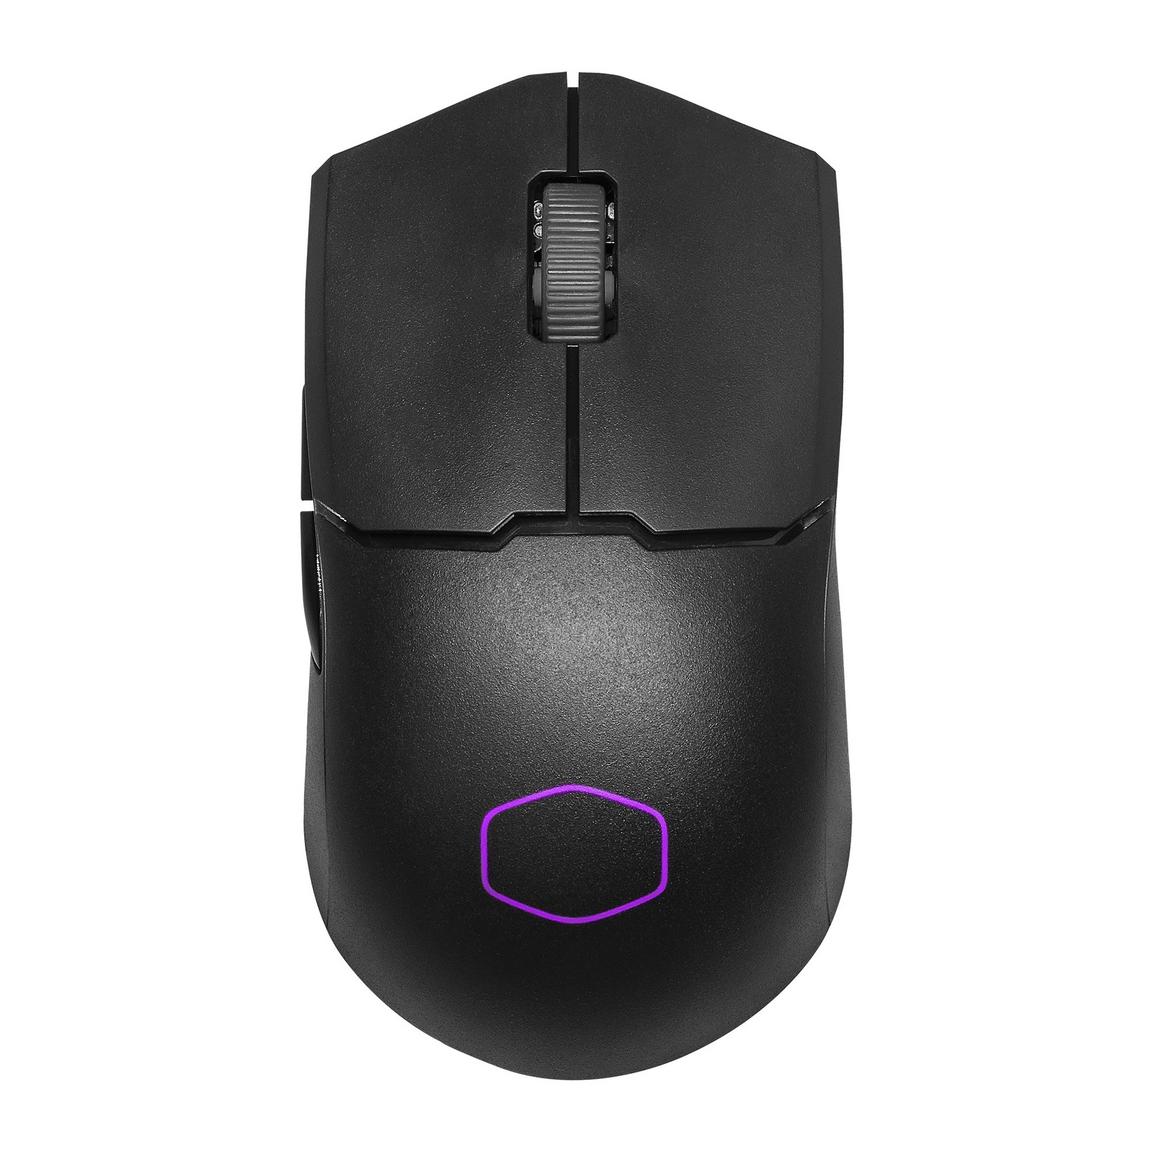 Cooler Master MM712 Black 2.4GHz Wireless Gaming Mouse